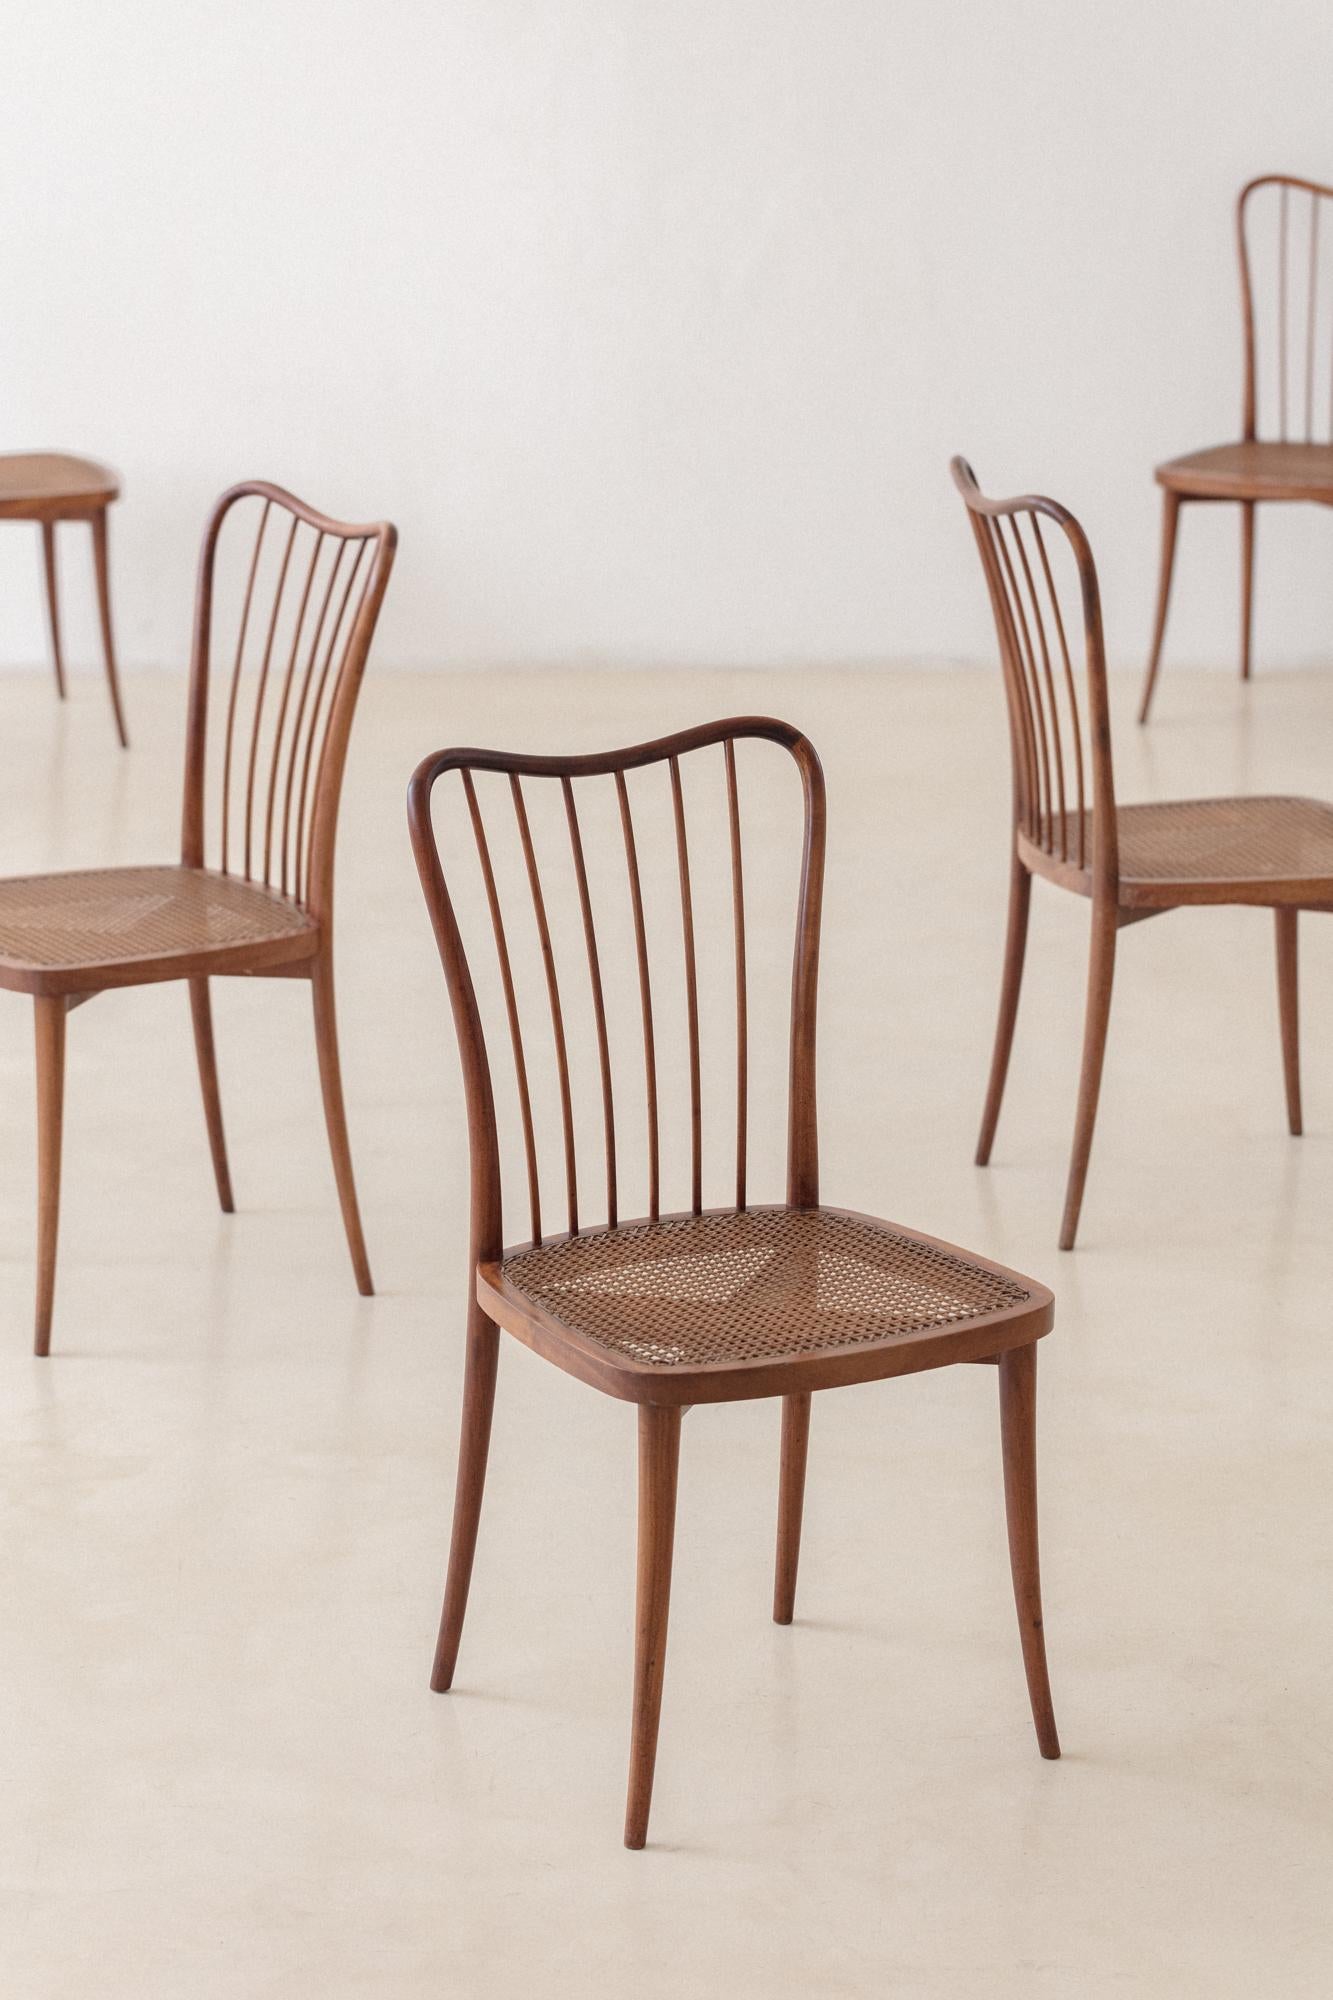 This set of eight exquisitely crafted Cane chairs in Amendoim Wood, designed by Joaquim Tenreiro (1906-1992) in the 1960s, is a gorgeous example of his mastery of technical and constructive solutions and an aesthetic experience based on